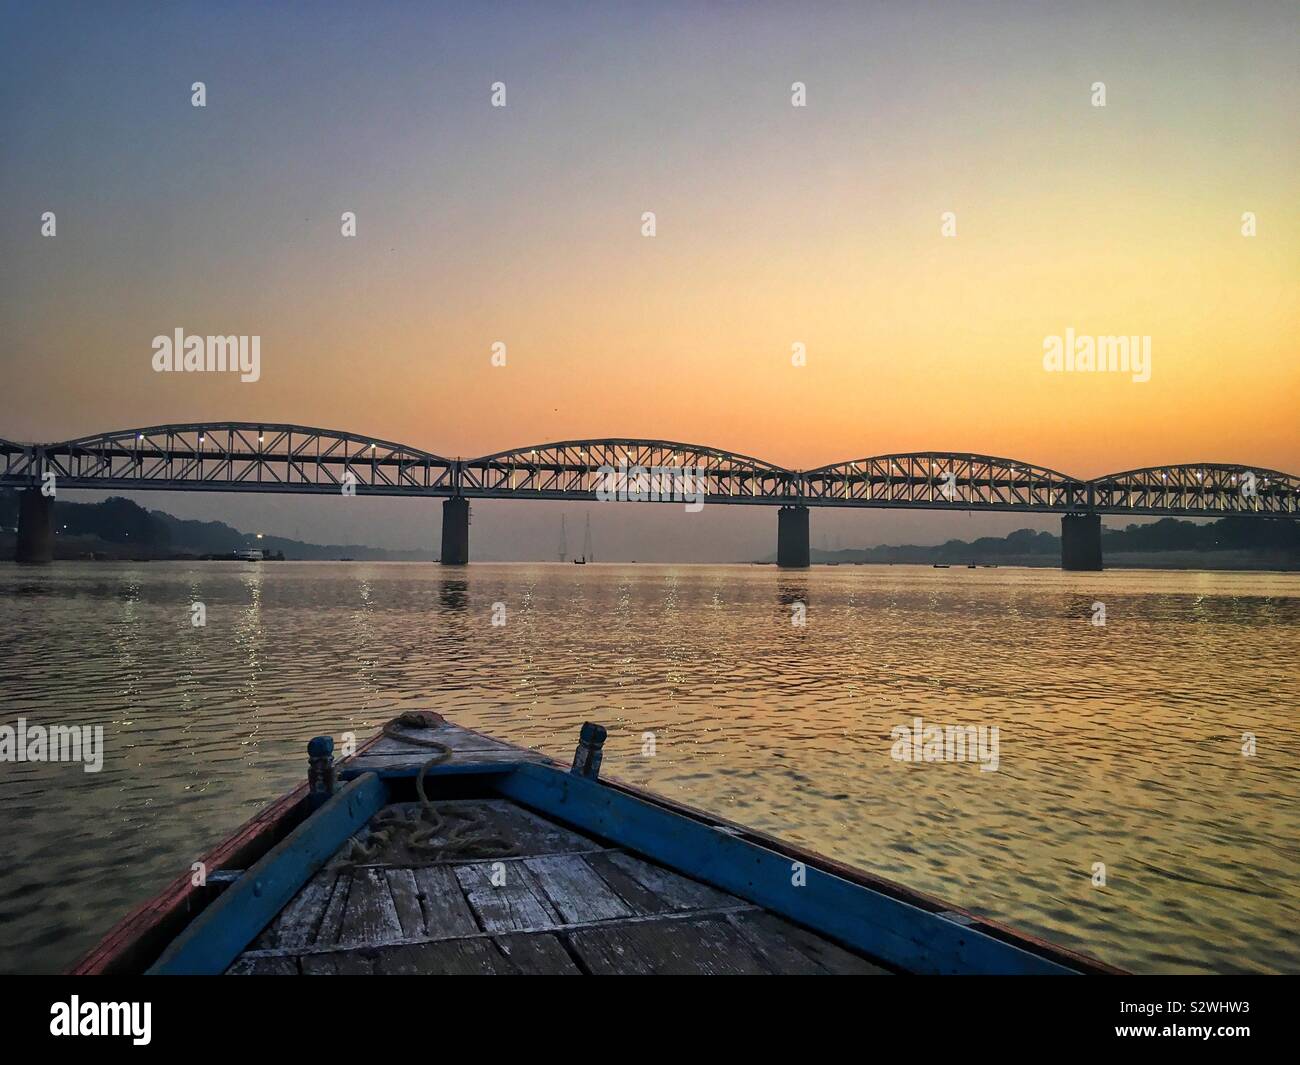 Sunrise on the River Ganges at Varanasi with the Dufferin Bridge. Stock Photo